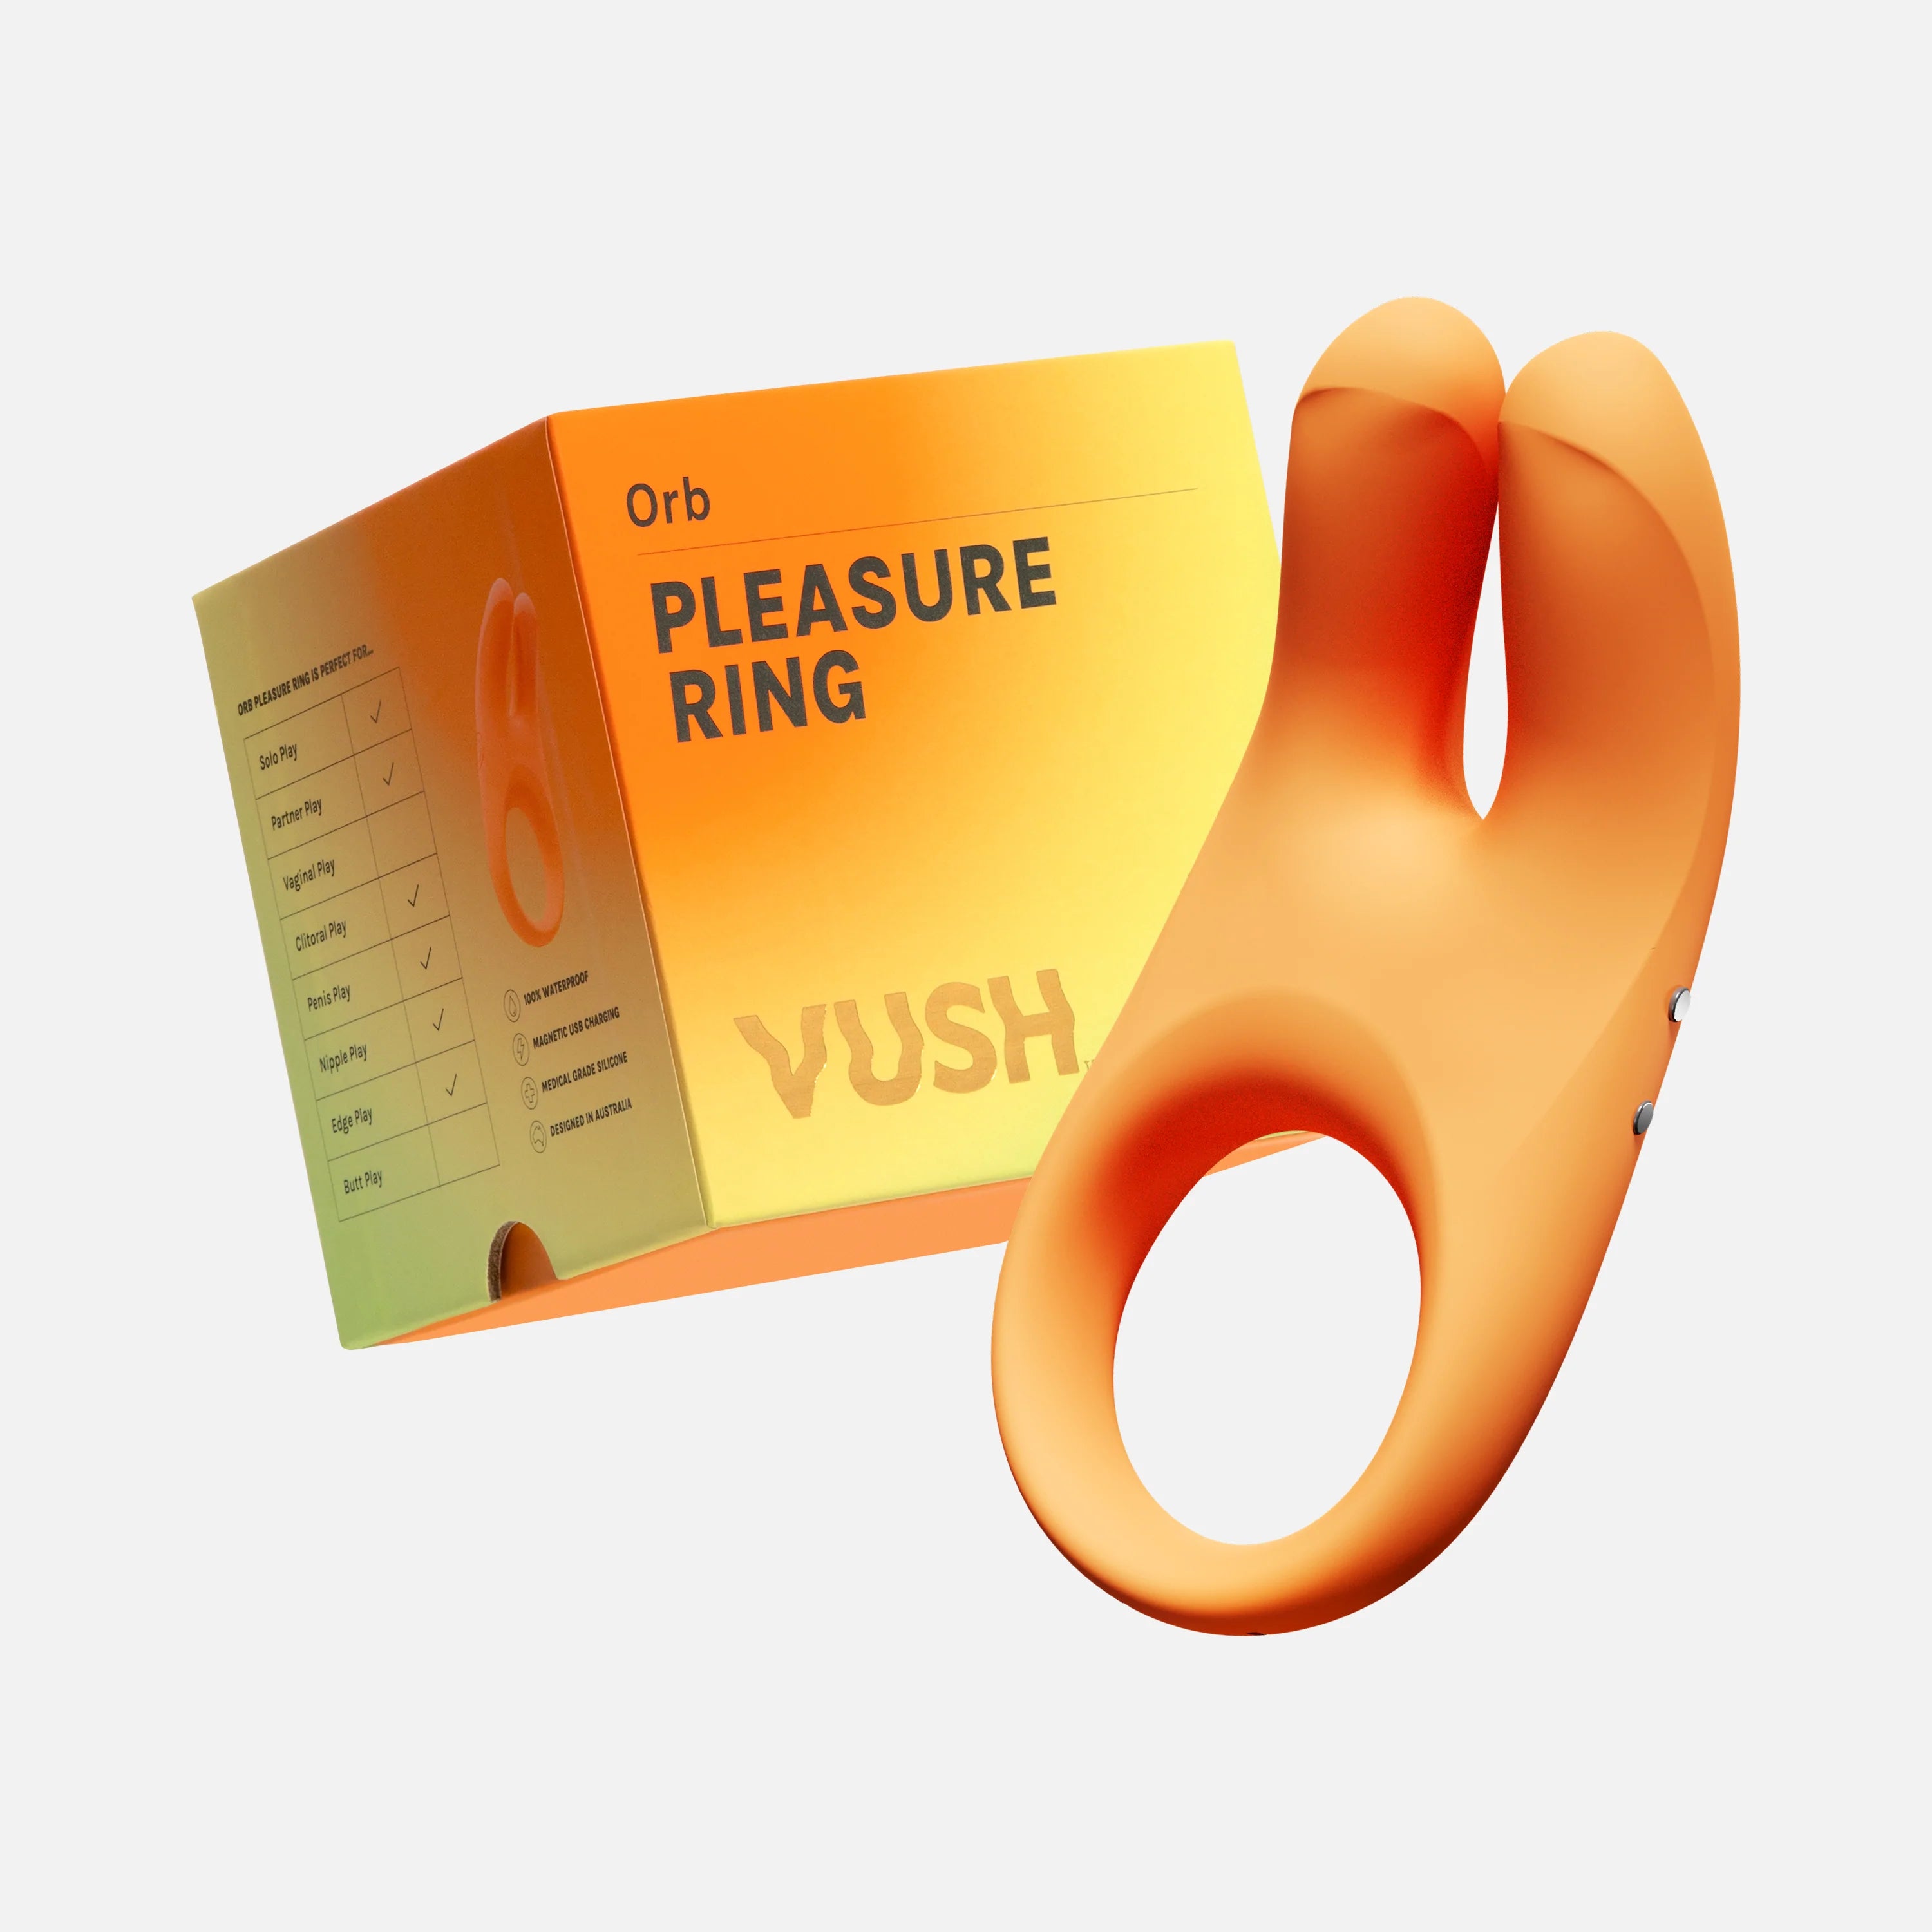 An orange cock ring with Rabbit-style ears on the top is in the foreground, and its orange box that says "Pleasure Ring, Vush" is in the background. 